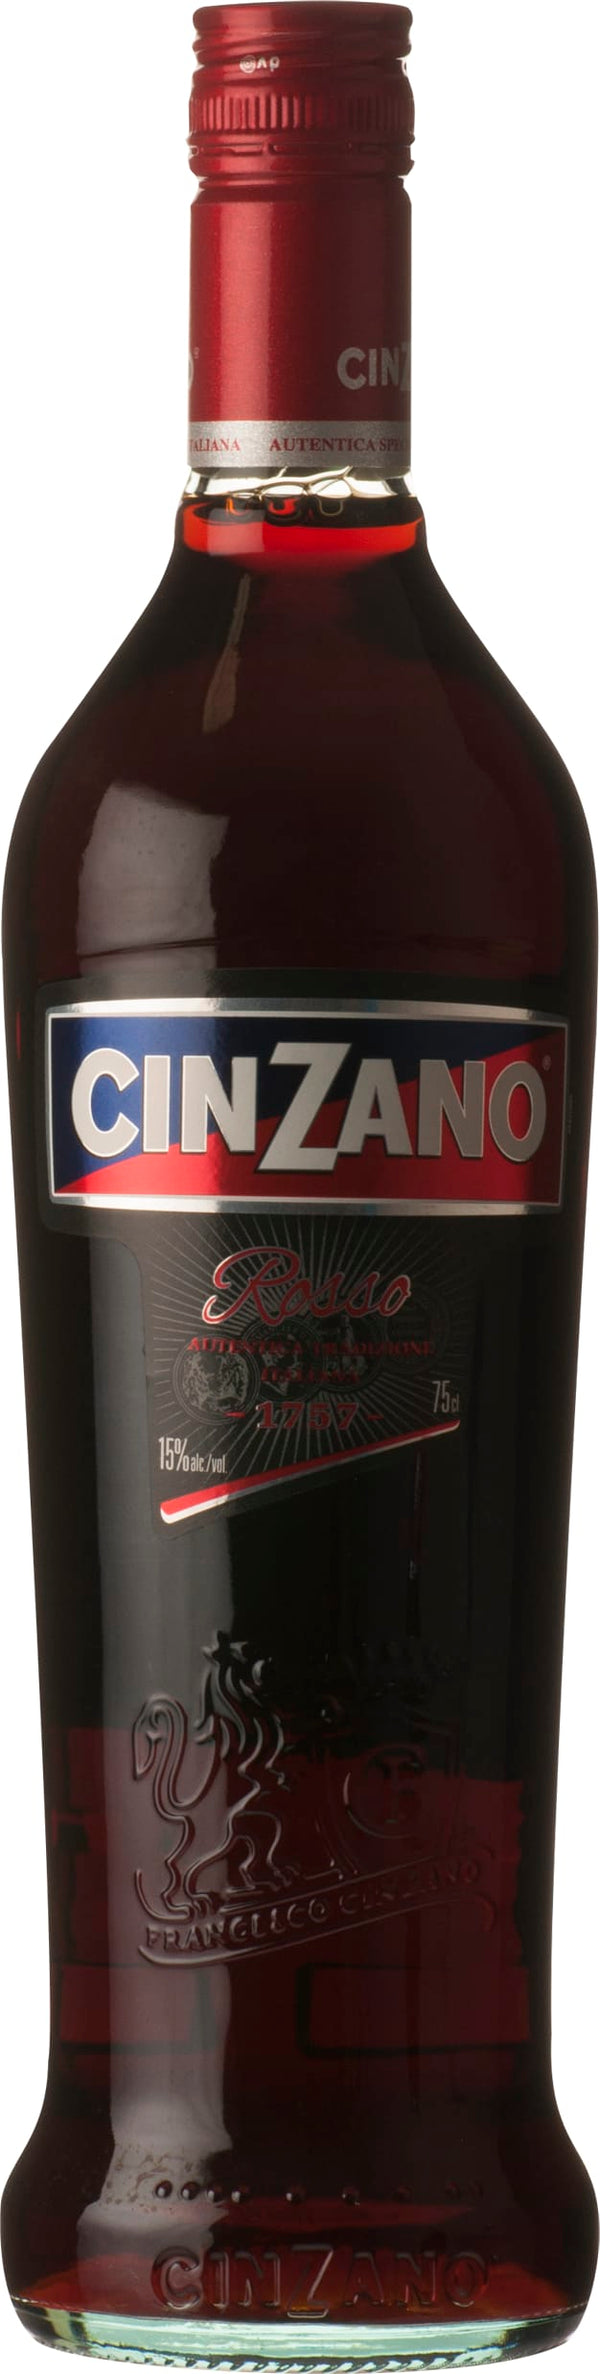 Cinzano Rosso NV6x75cl - Just Wines 